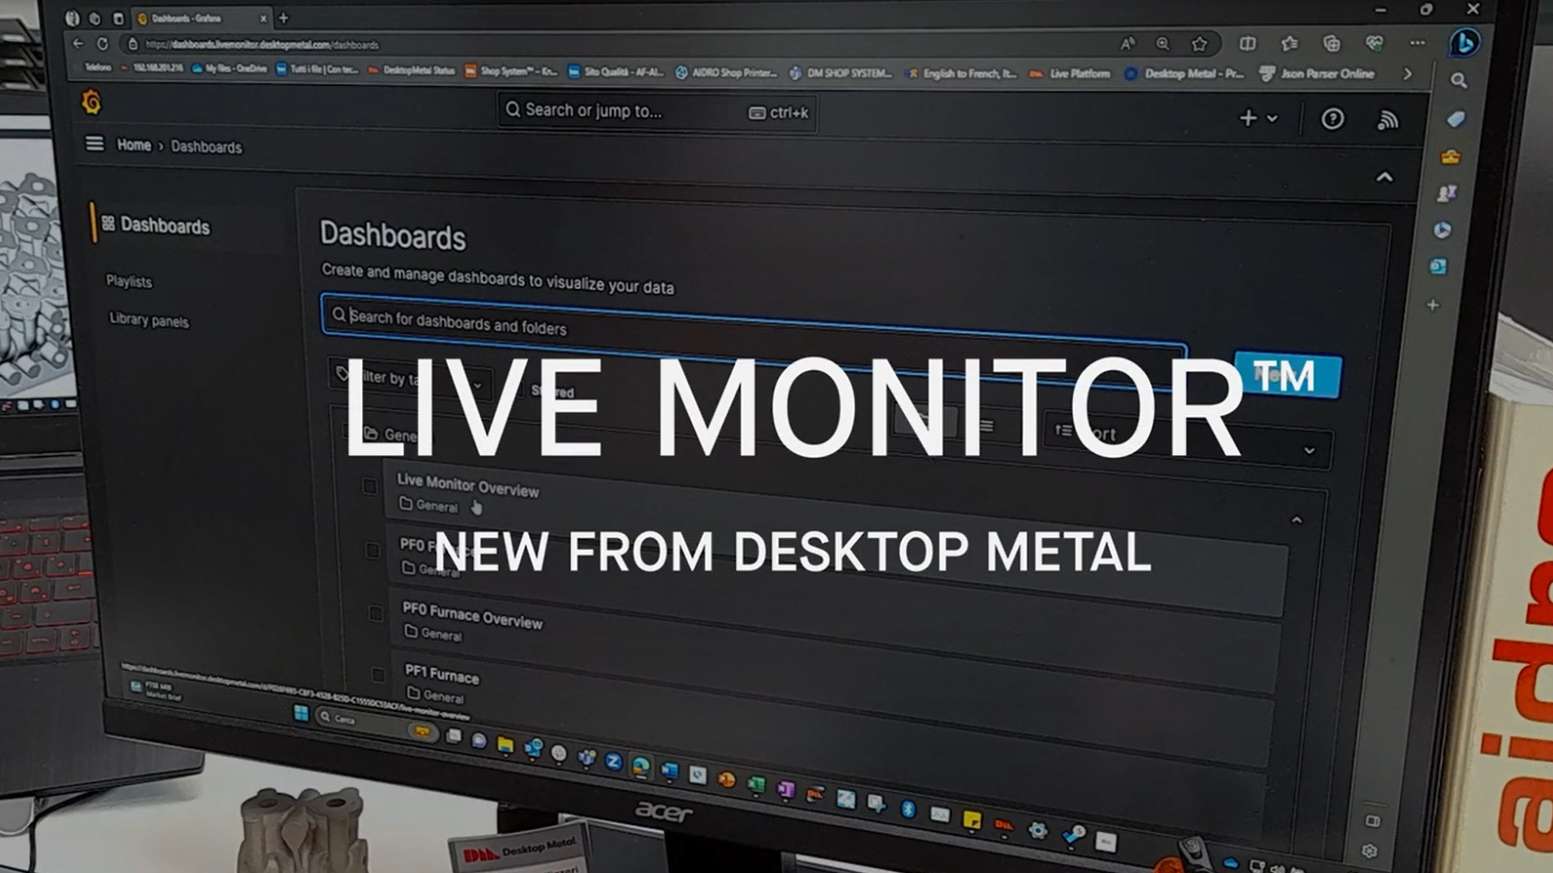 Live Monitor™:  Access system status and statistics from any web browser, anyplace, anytime